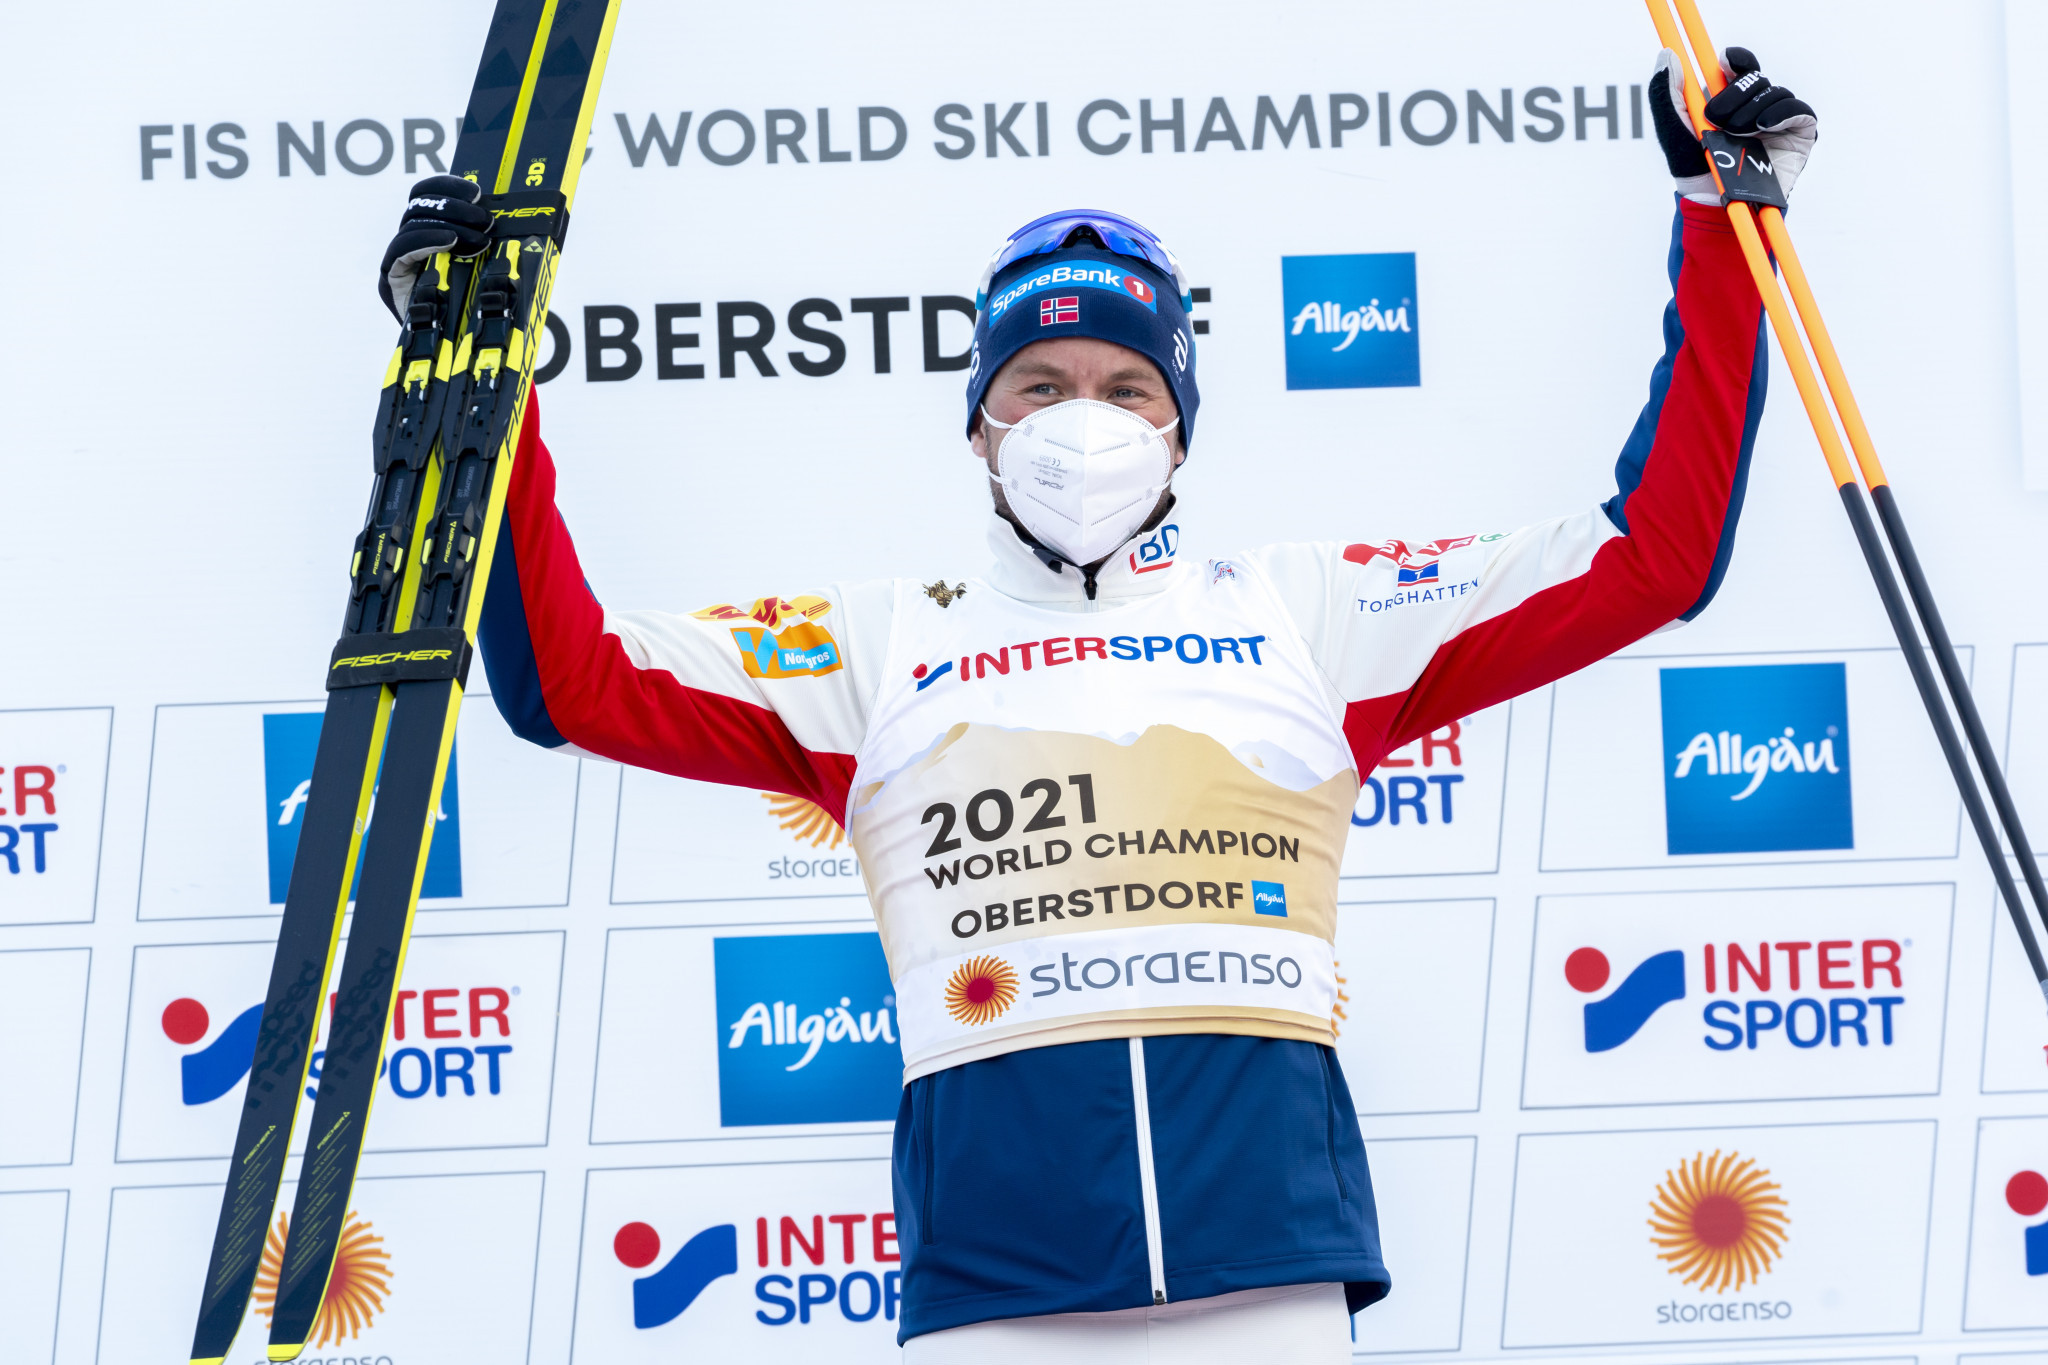 Emil Iversen was upgraded to gold after the race ©Getty Images